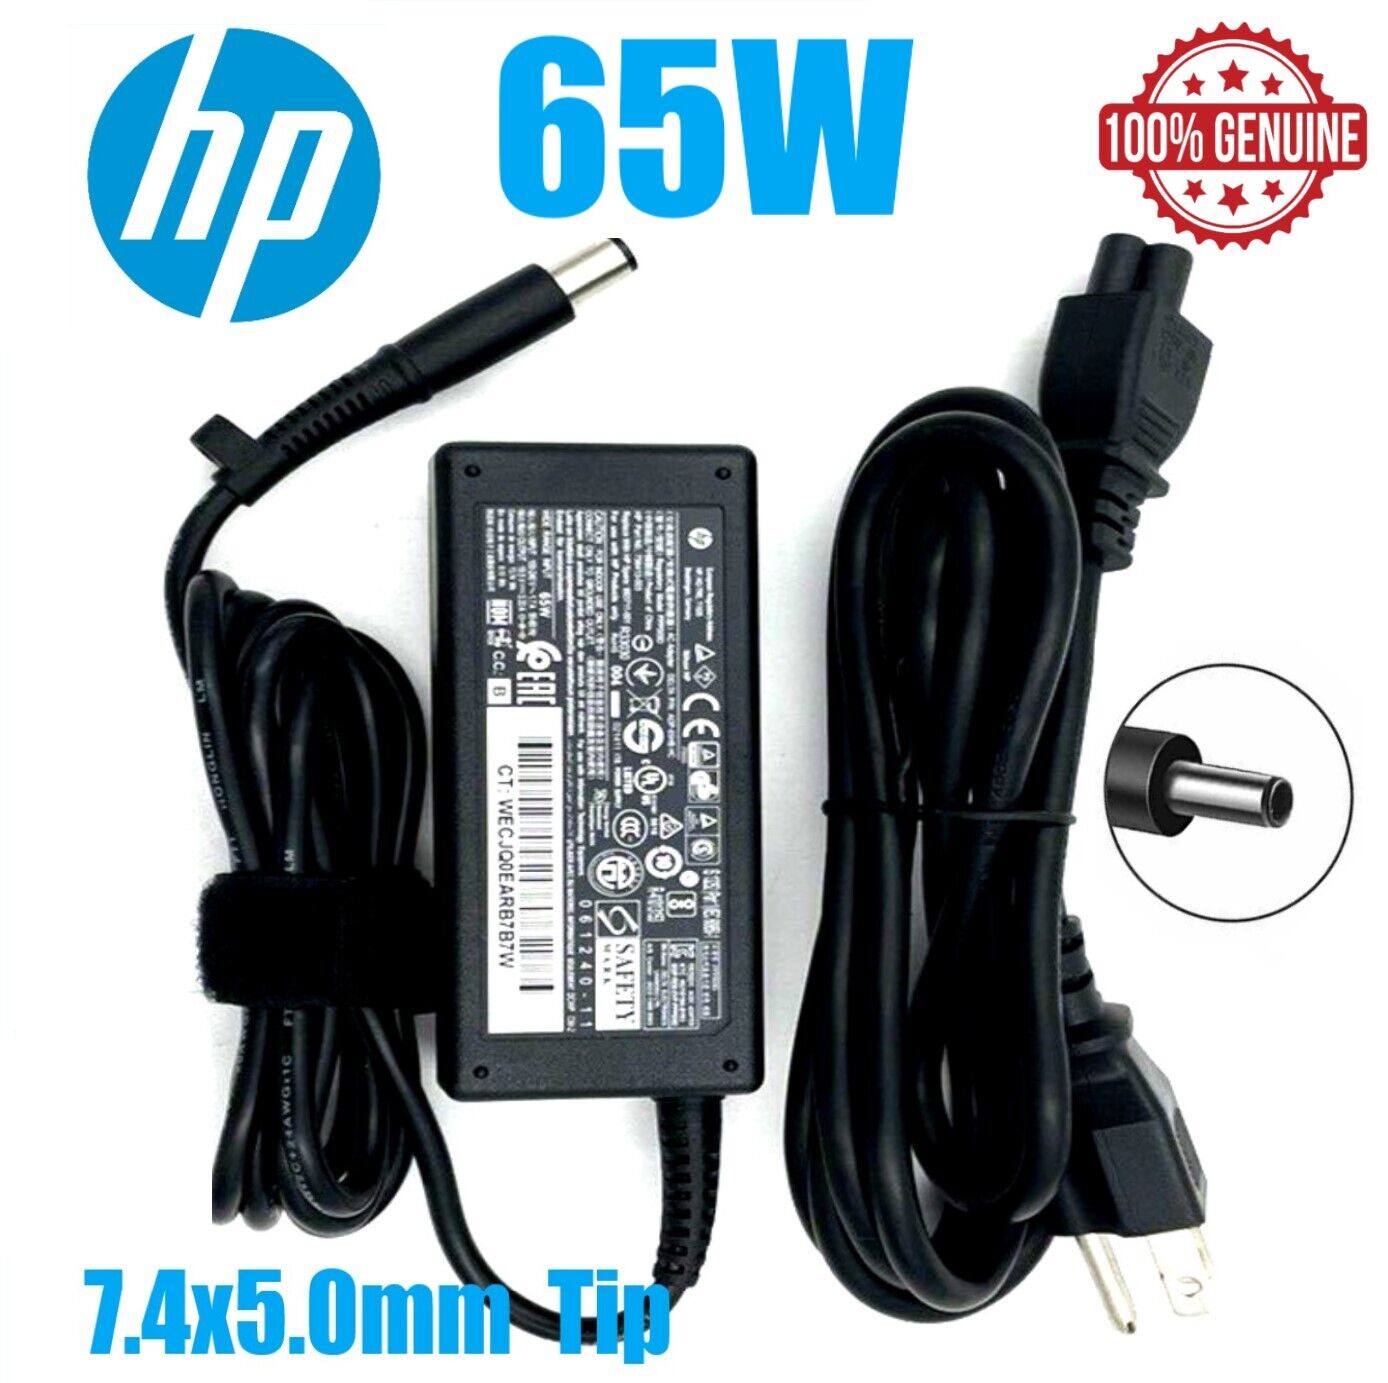 HP ProBook 450 640 650 840 850 G1 OEM Laptop Charger AC Power Adapter 65W